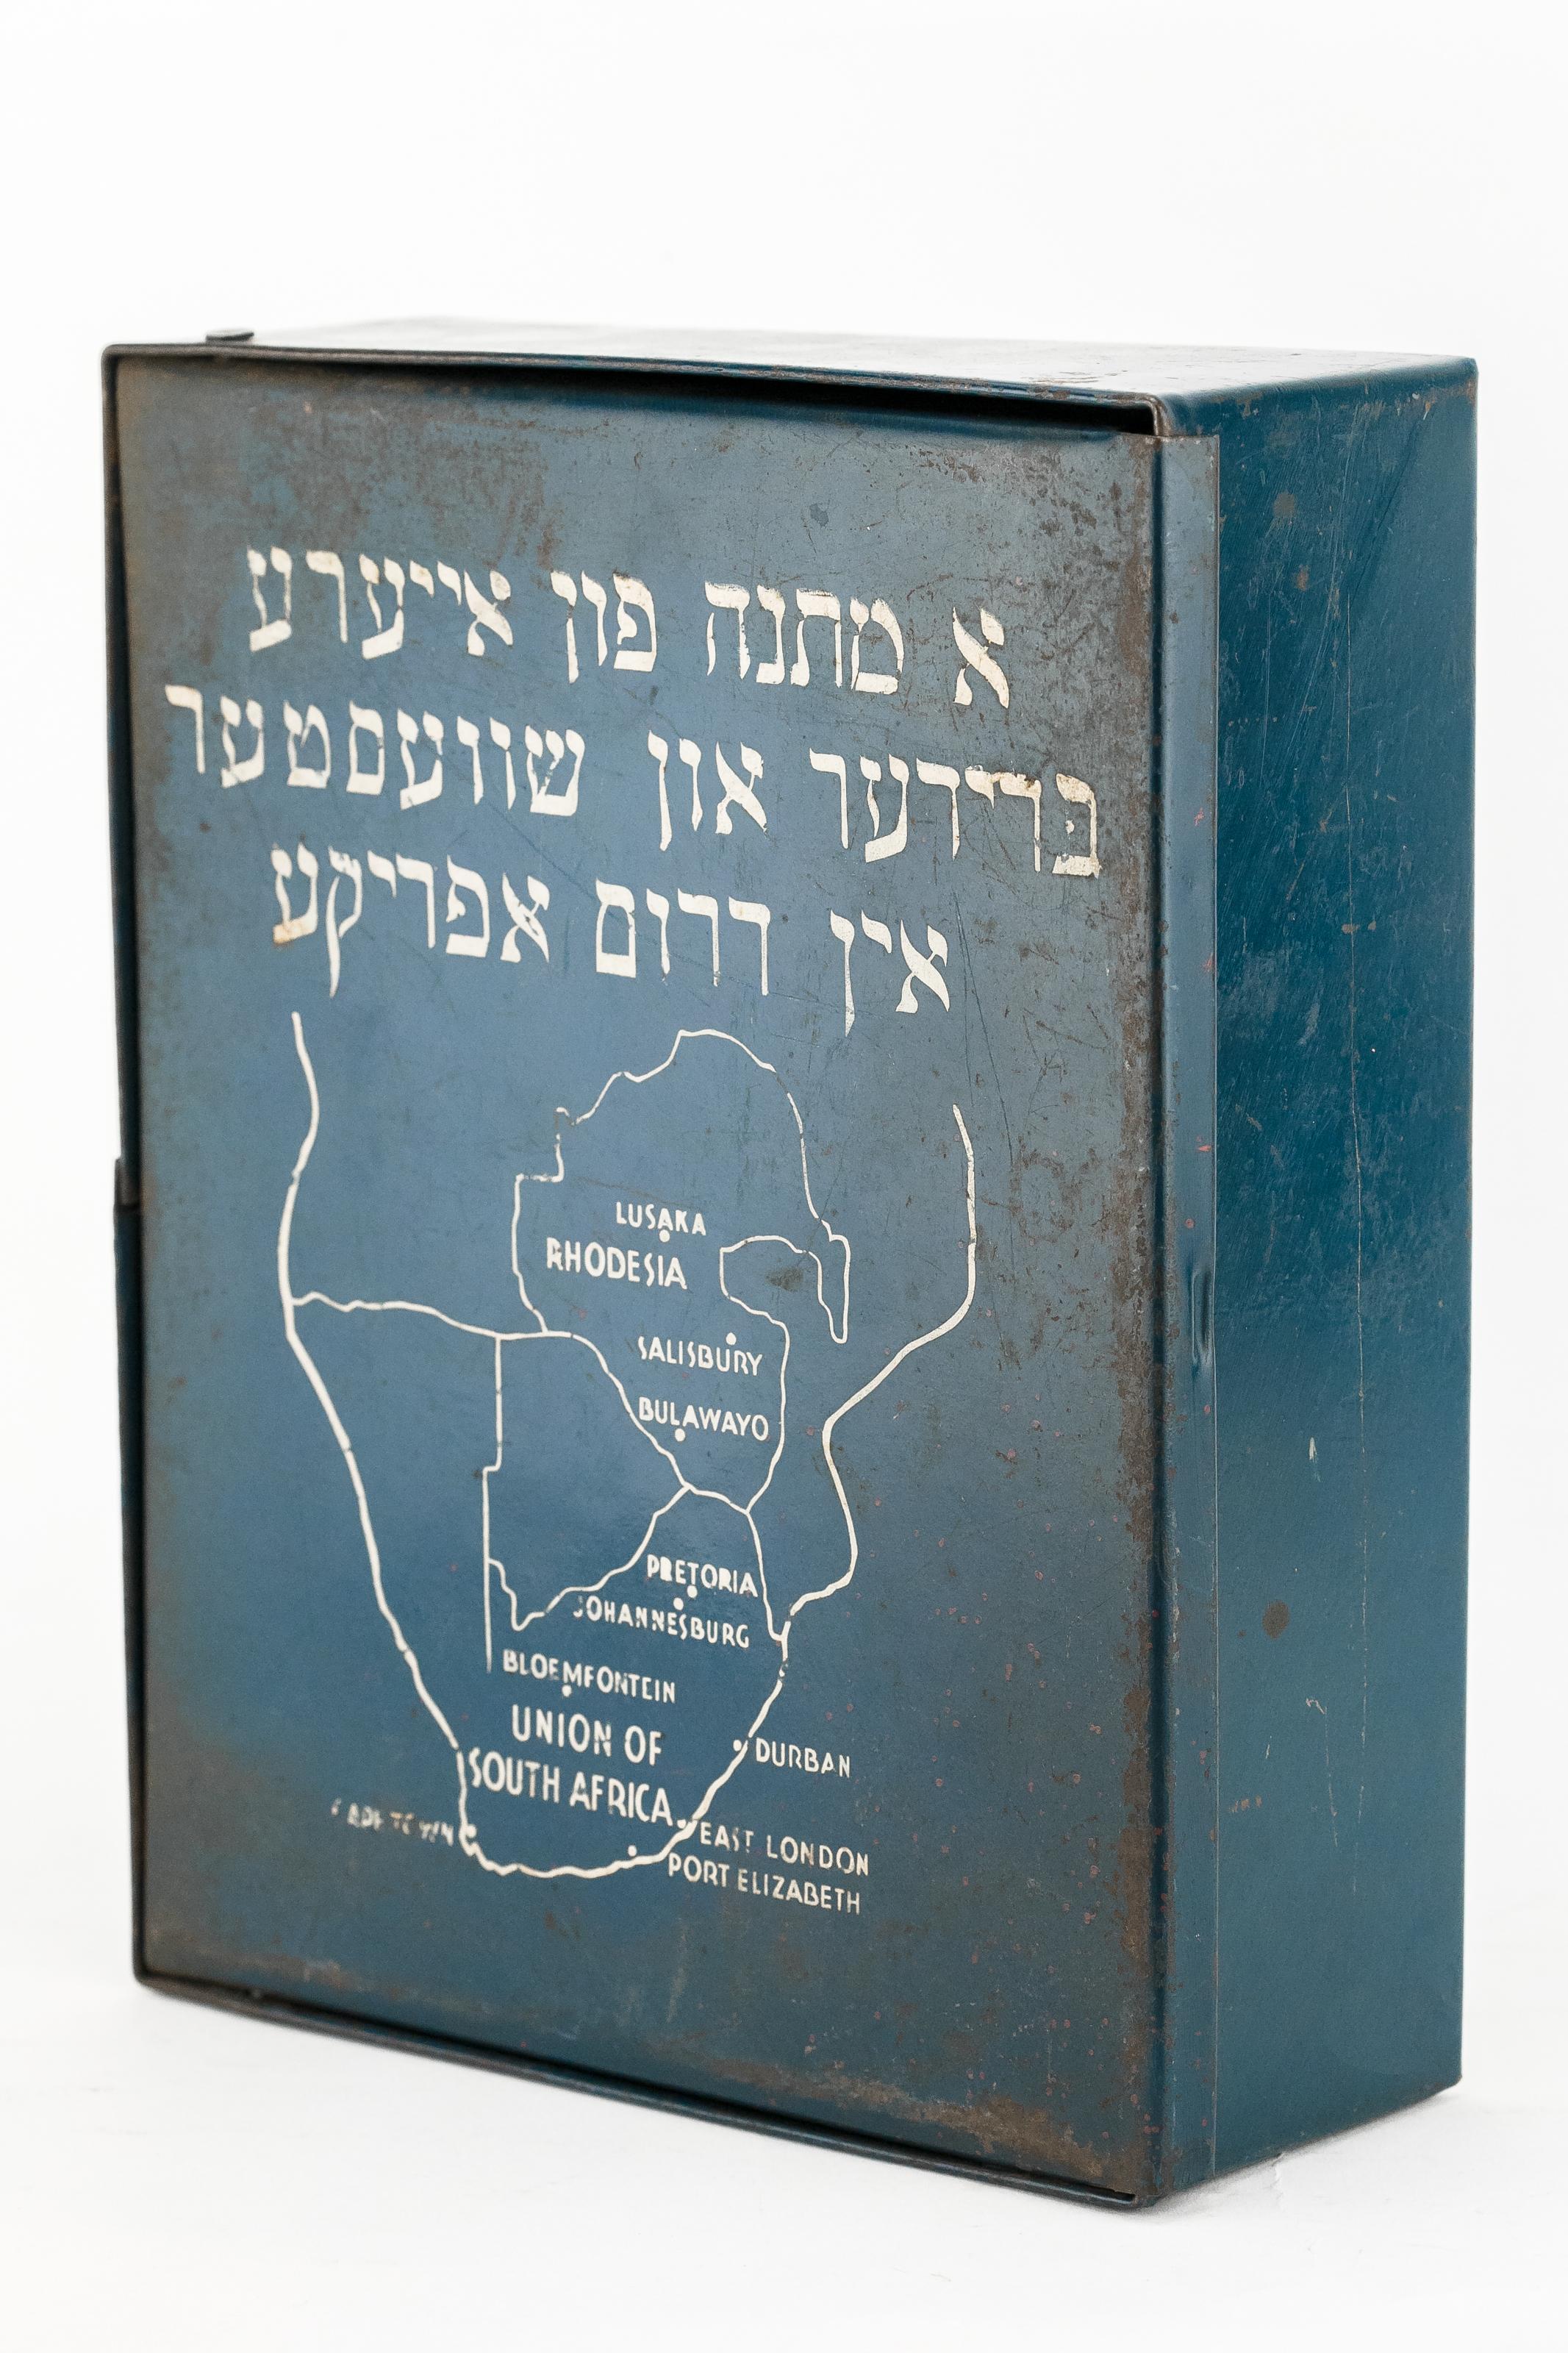 Metal school supply box sent by the South Africa Jewish Wars Appeal to the Wels displaced persons (DP) camp in Austria, 1947.
Painted blue and white with the map of South Africa, and Hebrew inscription: 